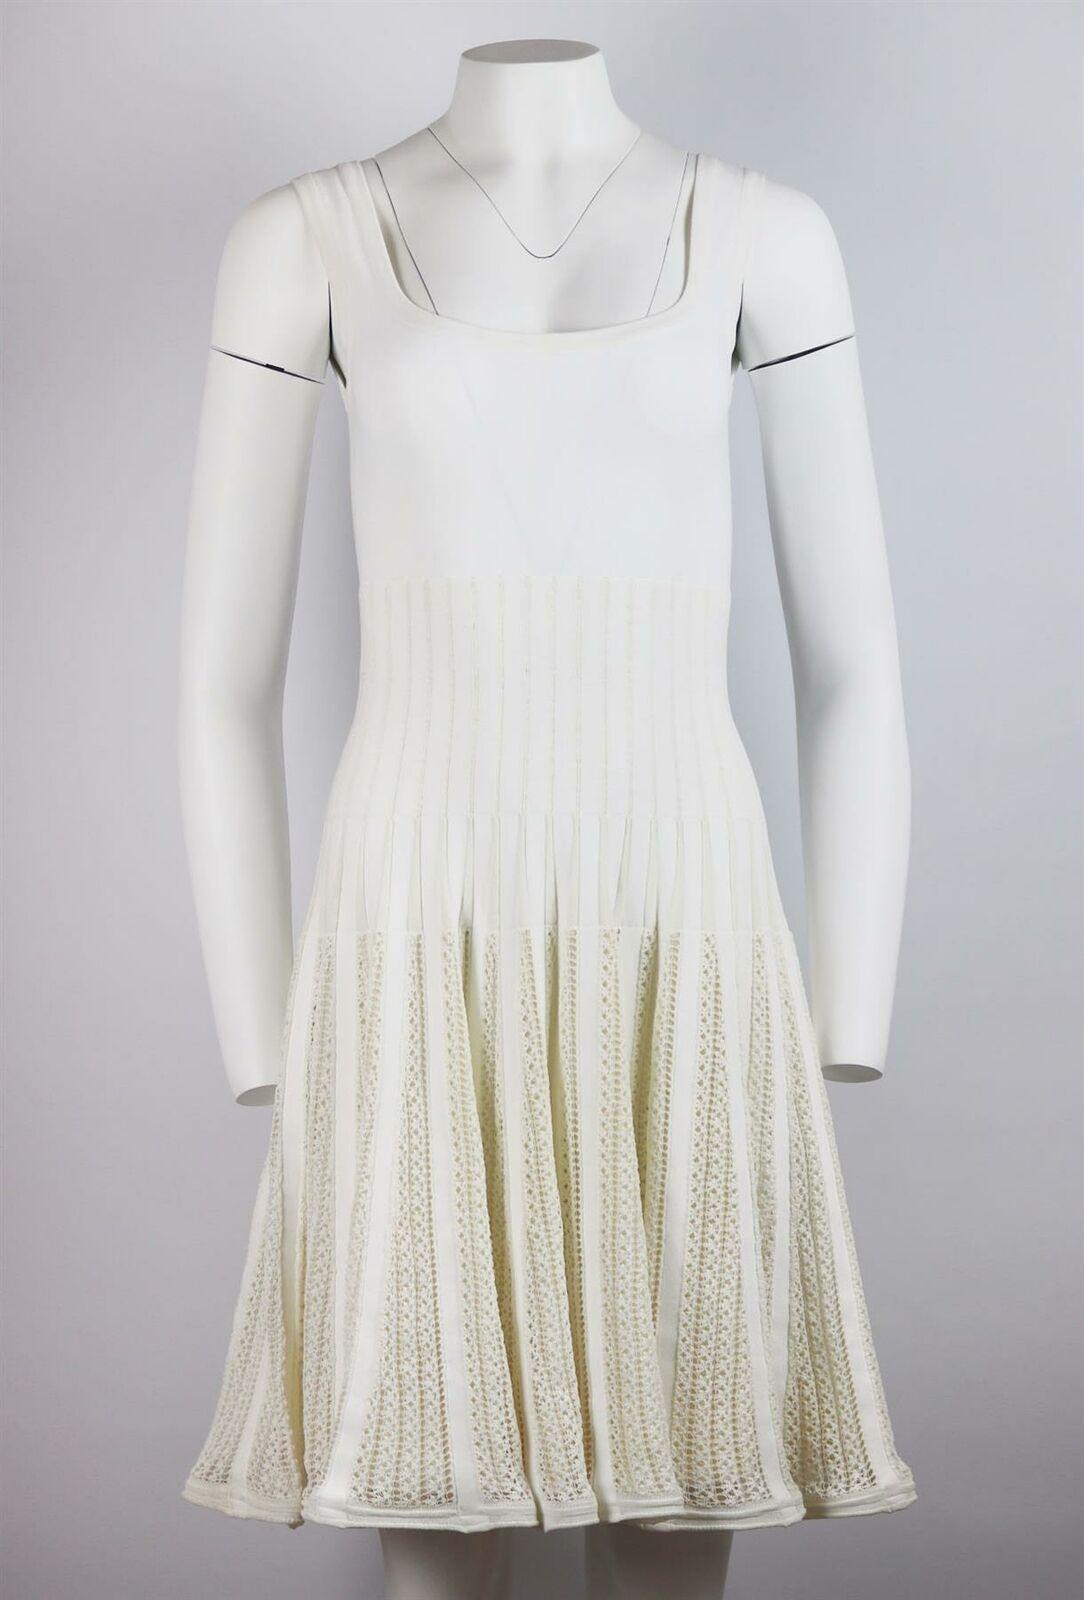 Azzedine Alaїa famously shunned fashion seasons and created beautiful, timeless collections instead this dress has been knitted by artisans in Italy, this cotton-blend mini dress is detailed with soft crochet on the swishy skirt.
White crocheted